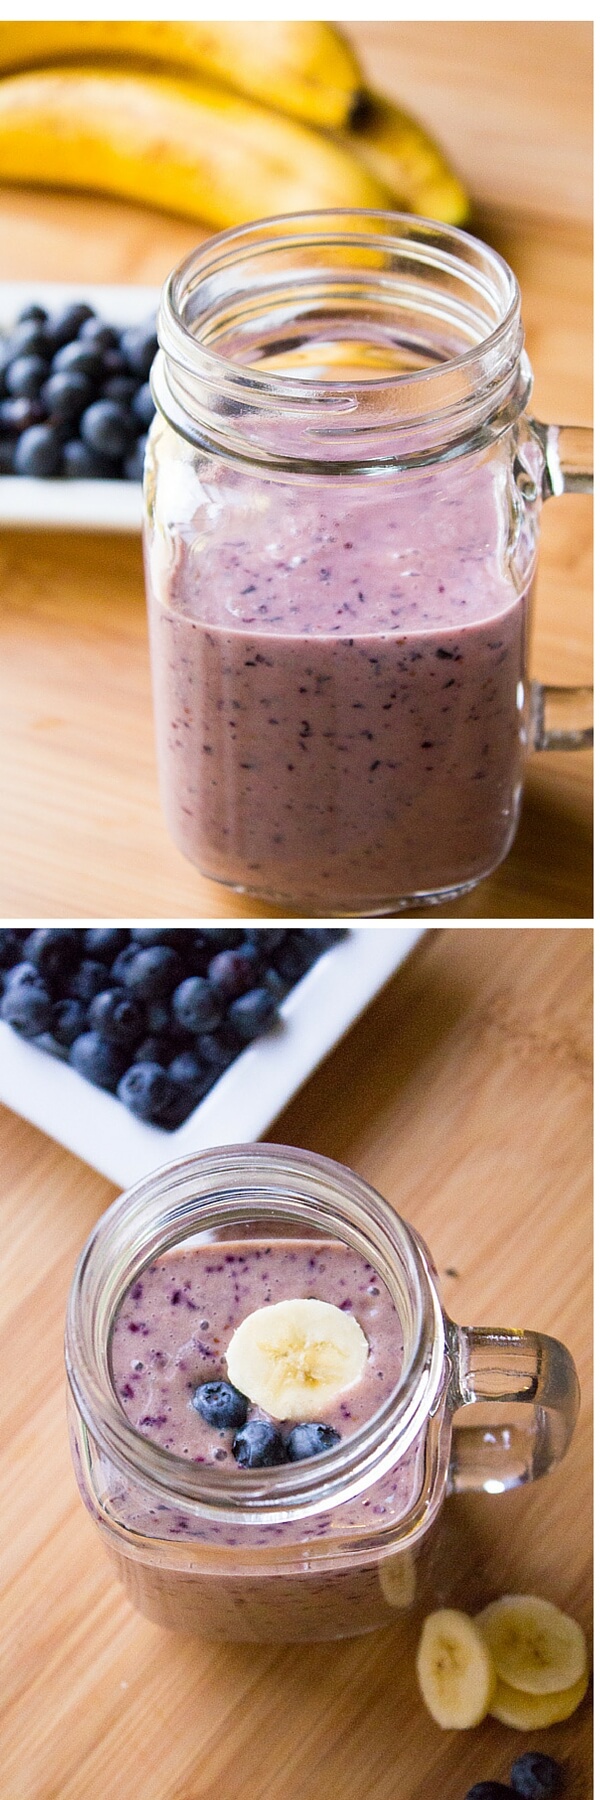 Blueberry Banana Smoothie! Thick & creamy, tastes delicious & totally healthy - have this smoothie for an on-the-go breakfast or healthy snack! www.justsotasty.com